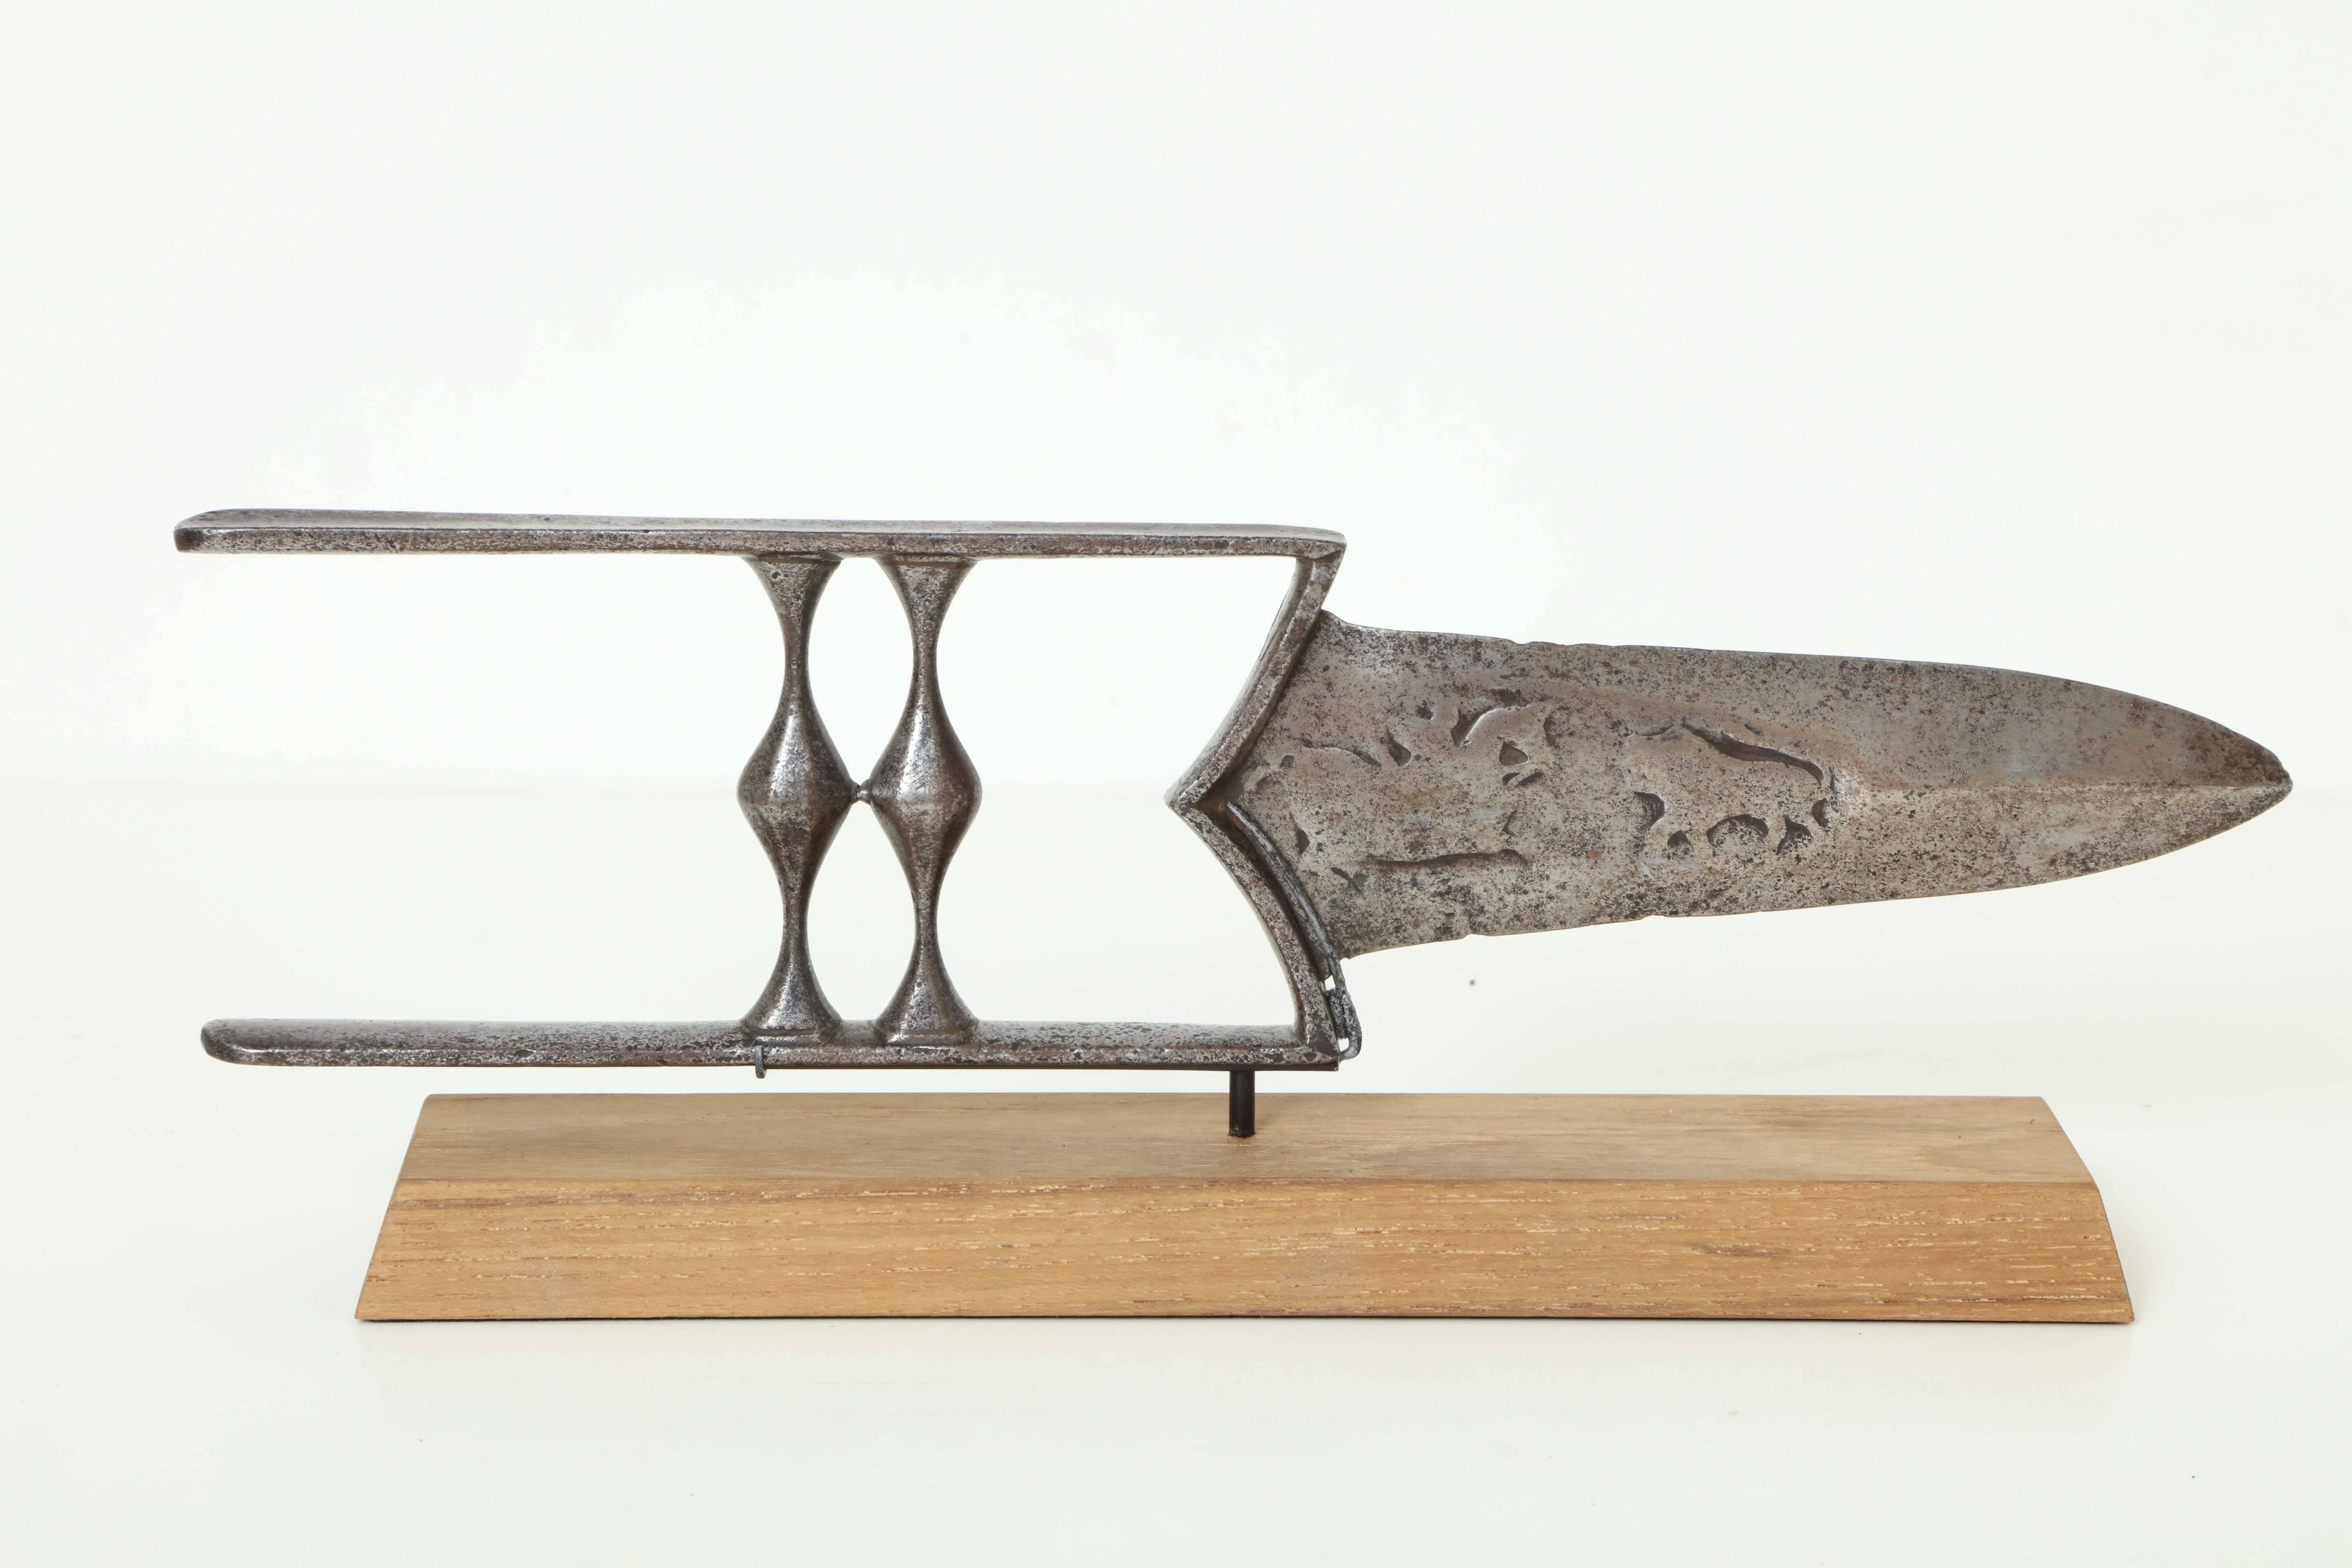 A 19th century Indian steel Katar (push-dagger) with raised figural animal decoration to the blade, mounted on a contemporary chamfered oak base.